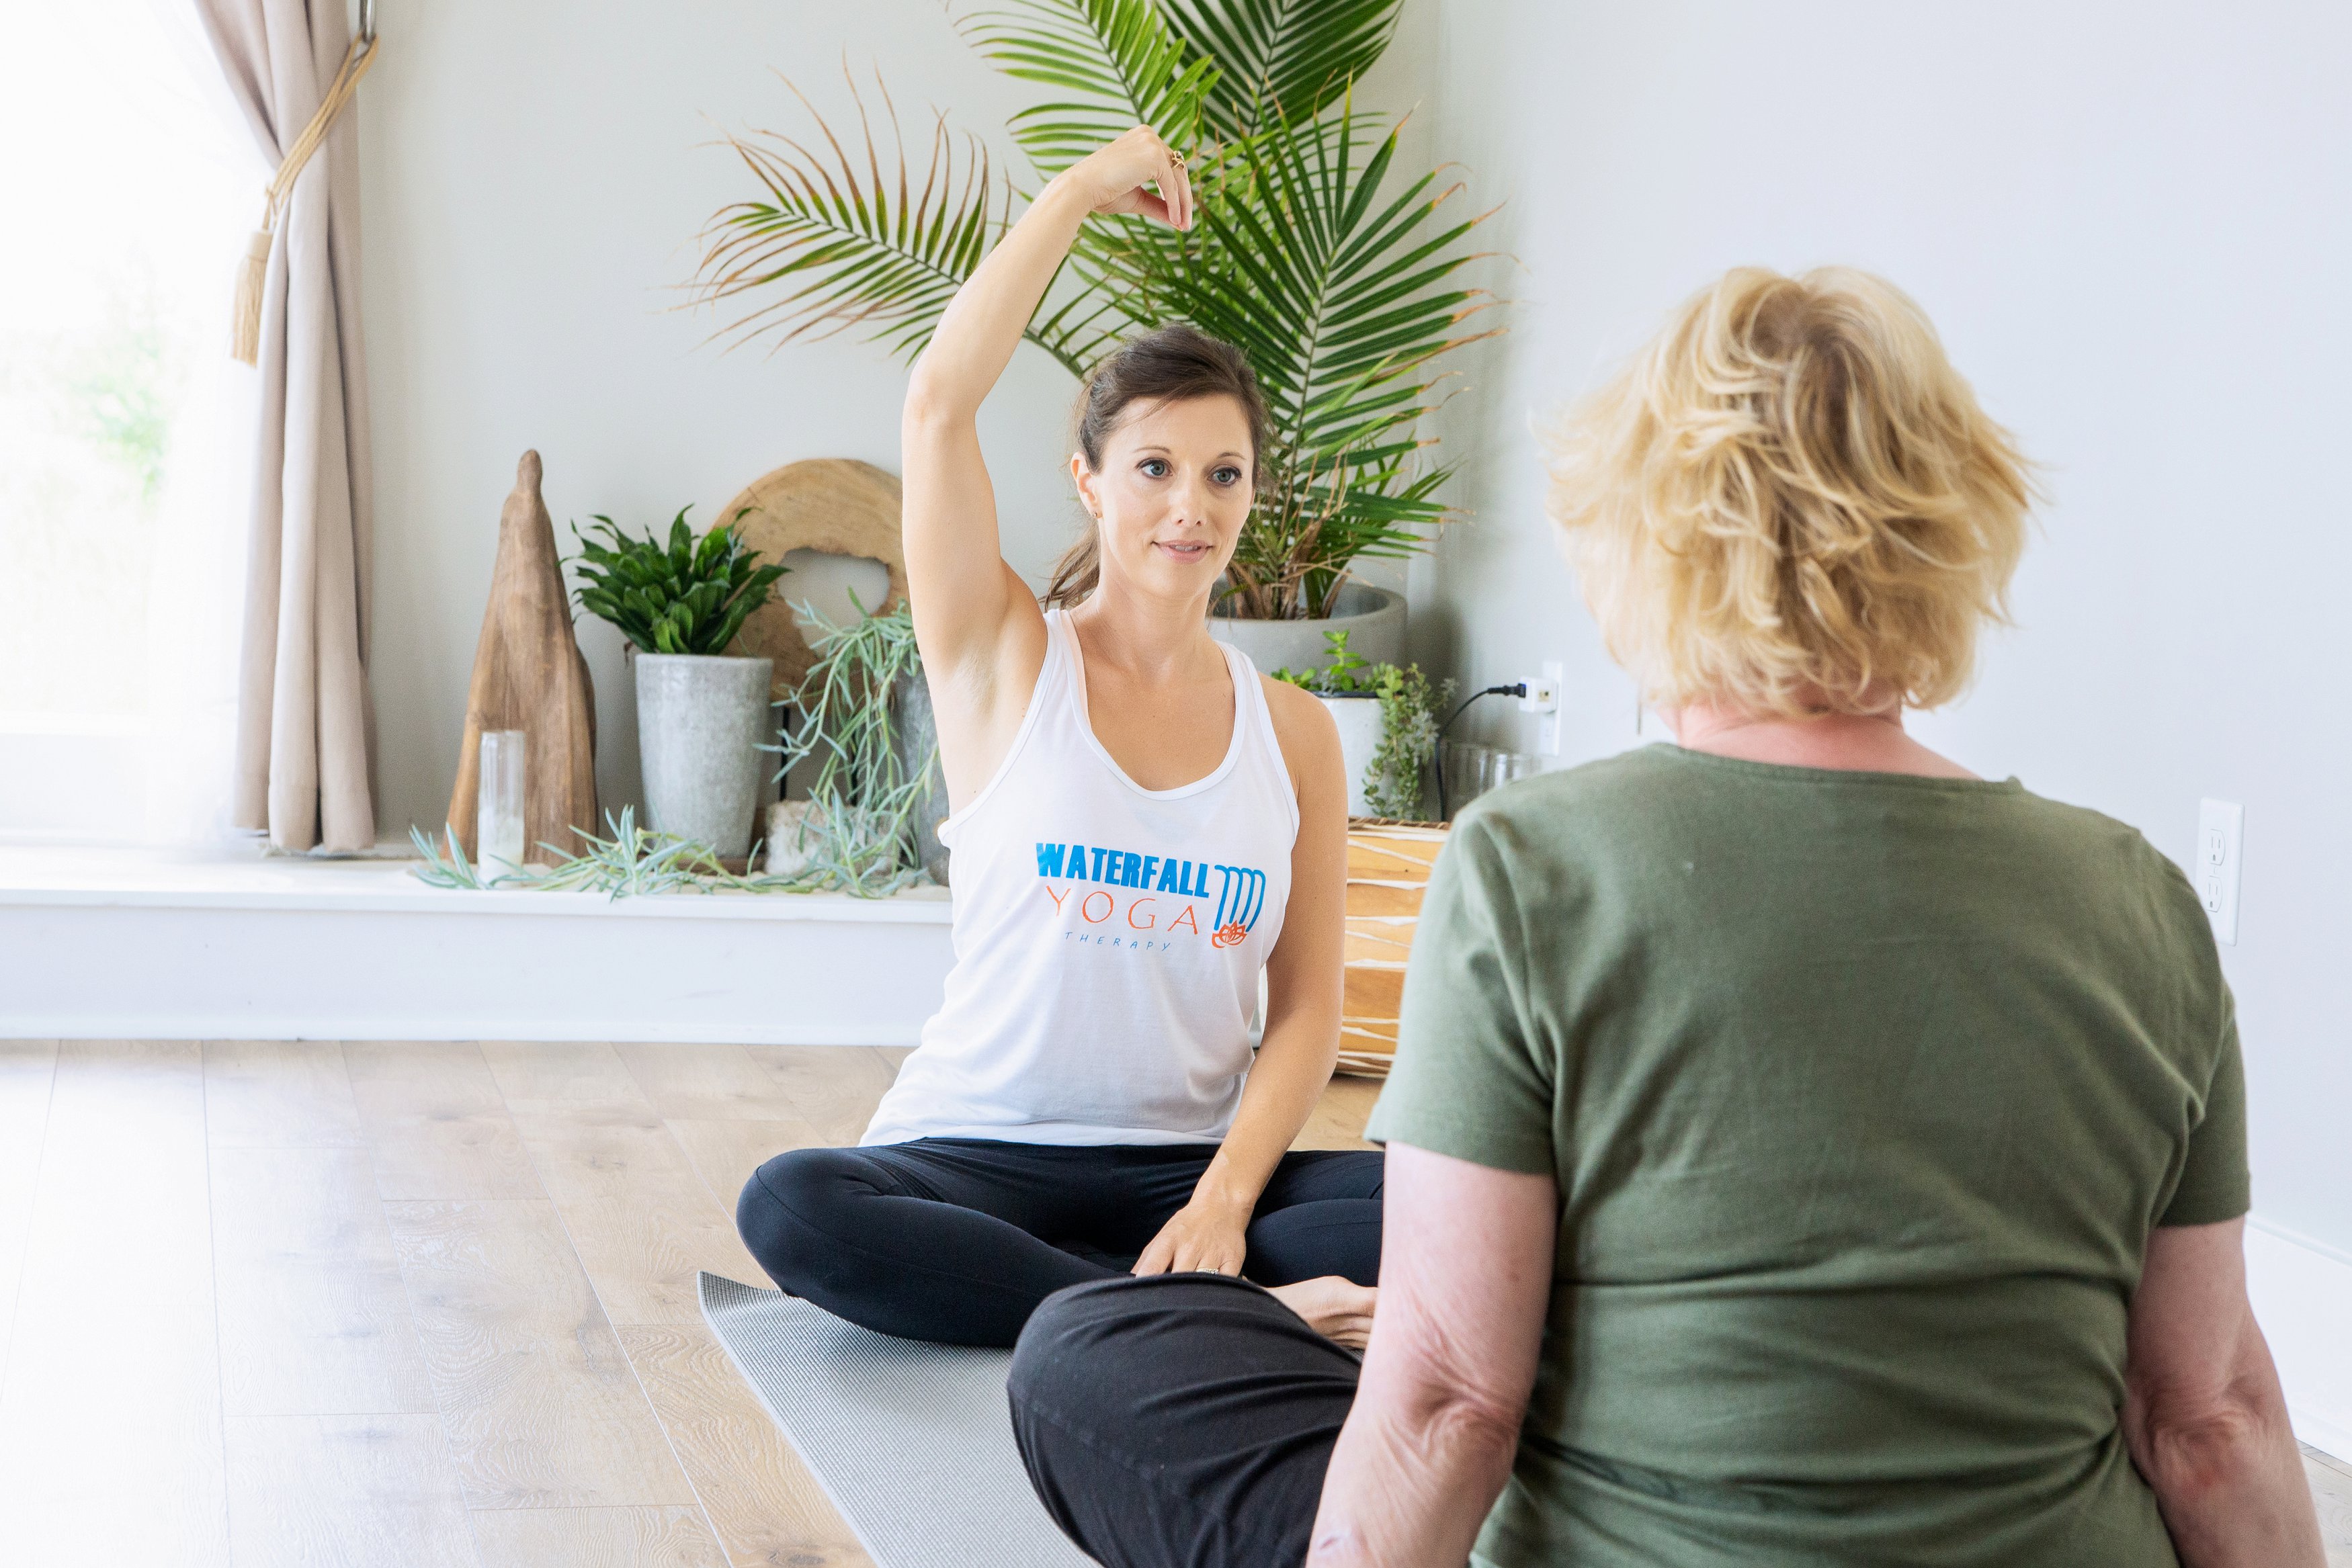 Yoga instructor giving instructions to a client